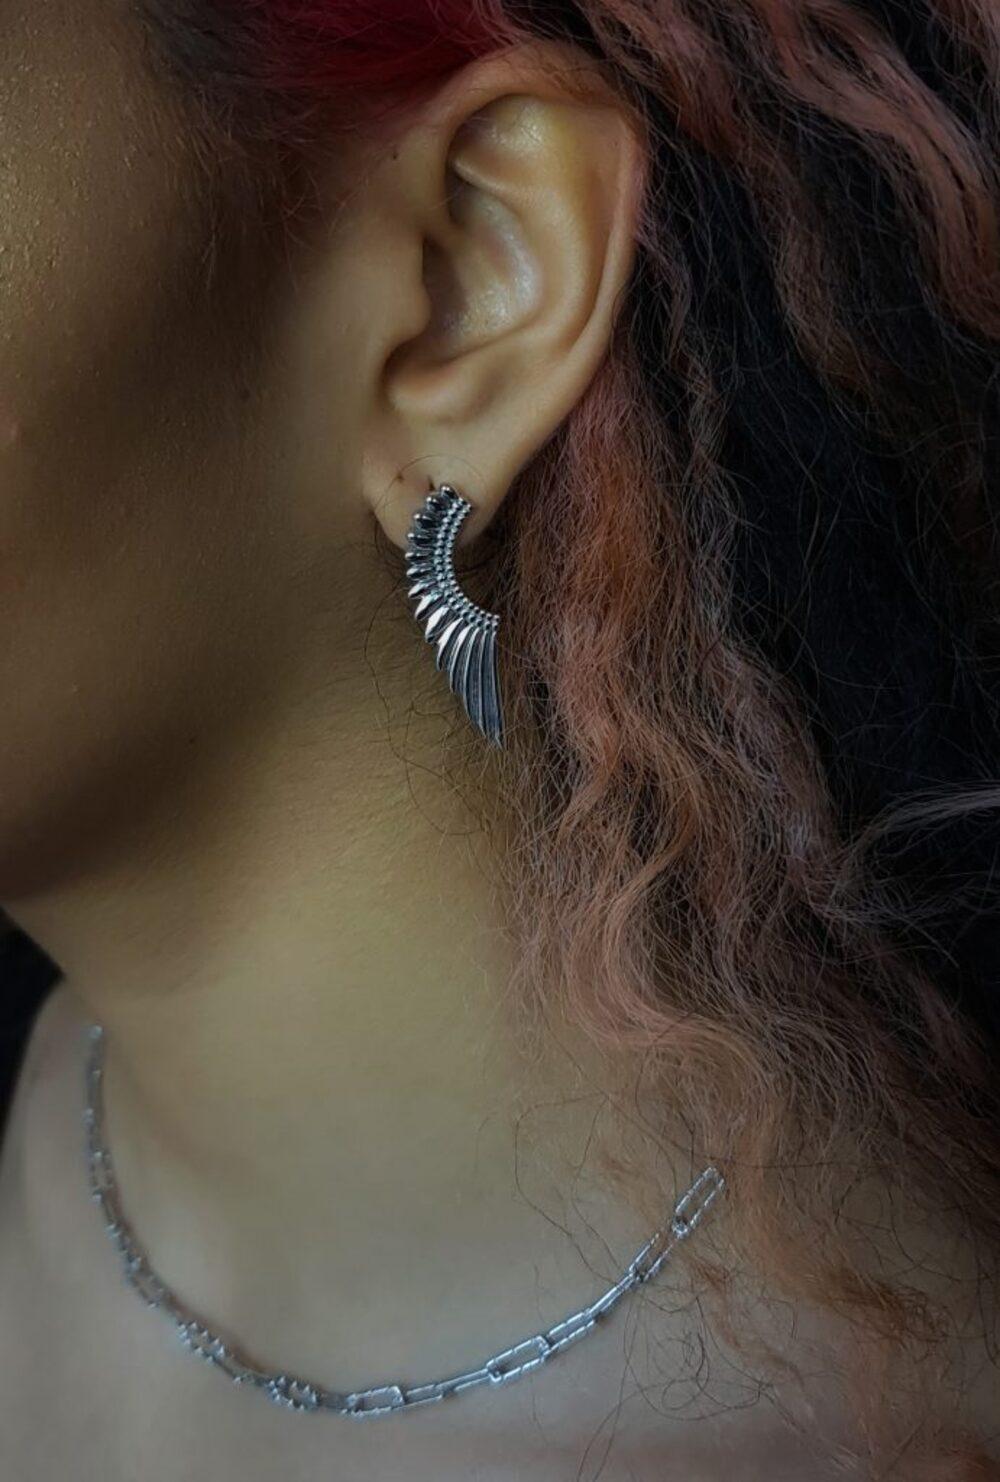 Product Details: 

Angel Earrings Beautifully crafted angel earrings with fine details an aide memoire of psalm 91:4 ‘He shall cover you with His feathers, and under His wings you shall take refuge; His truth shall be your shield and [a] buckler.’’.